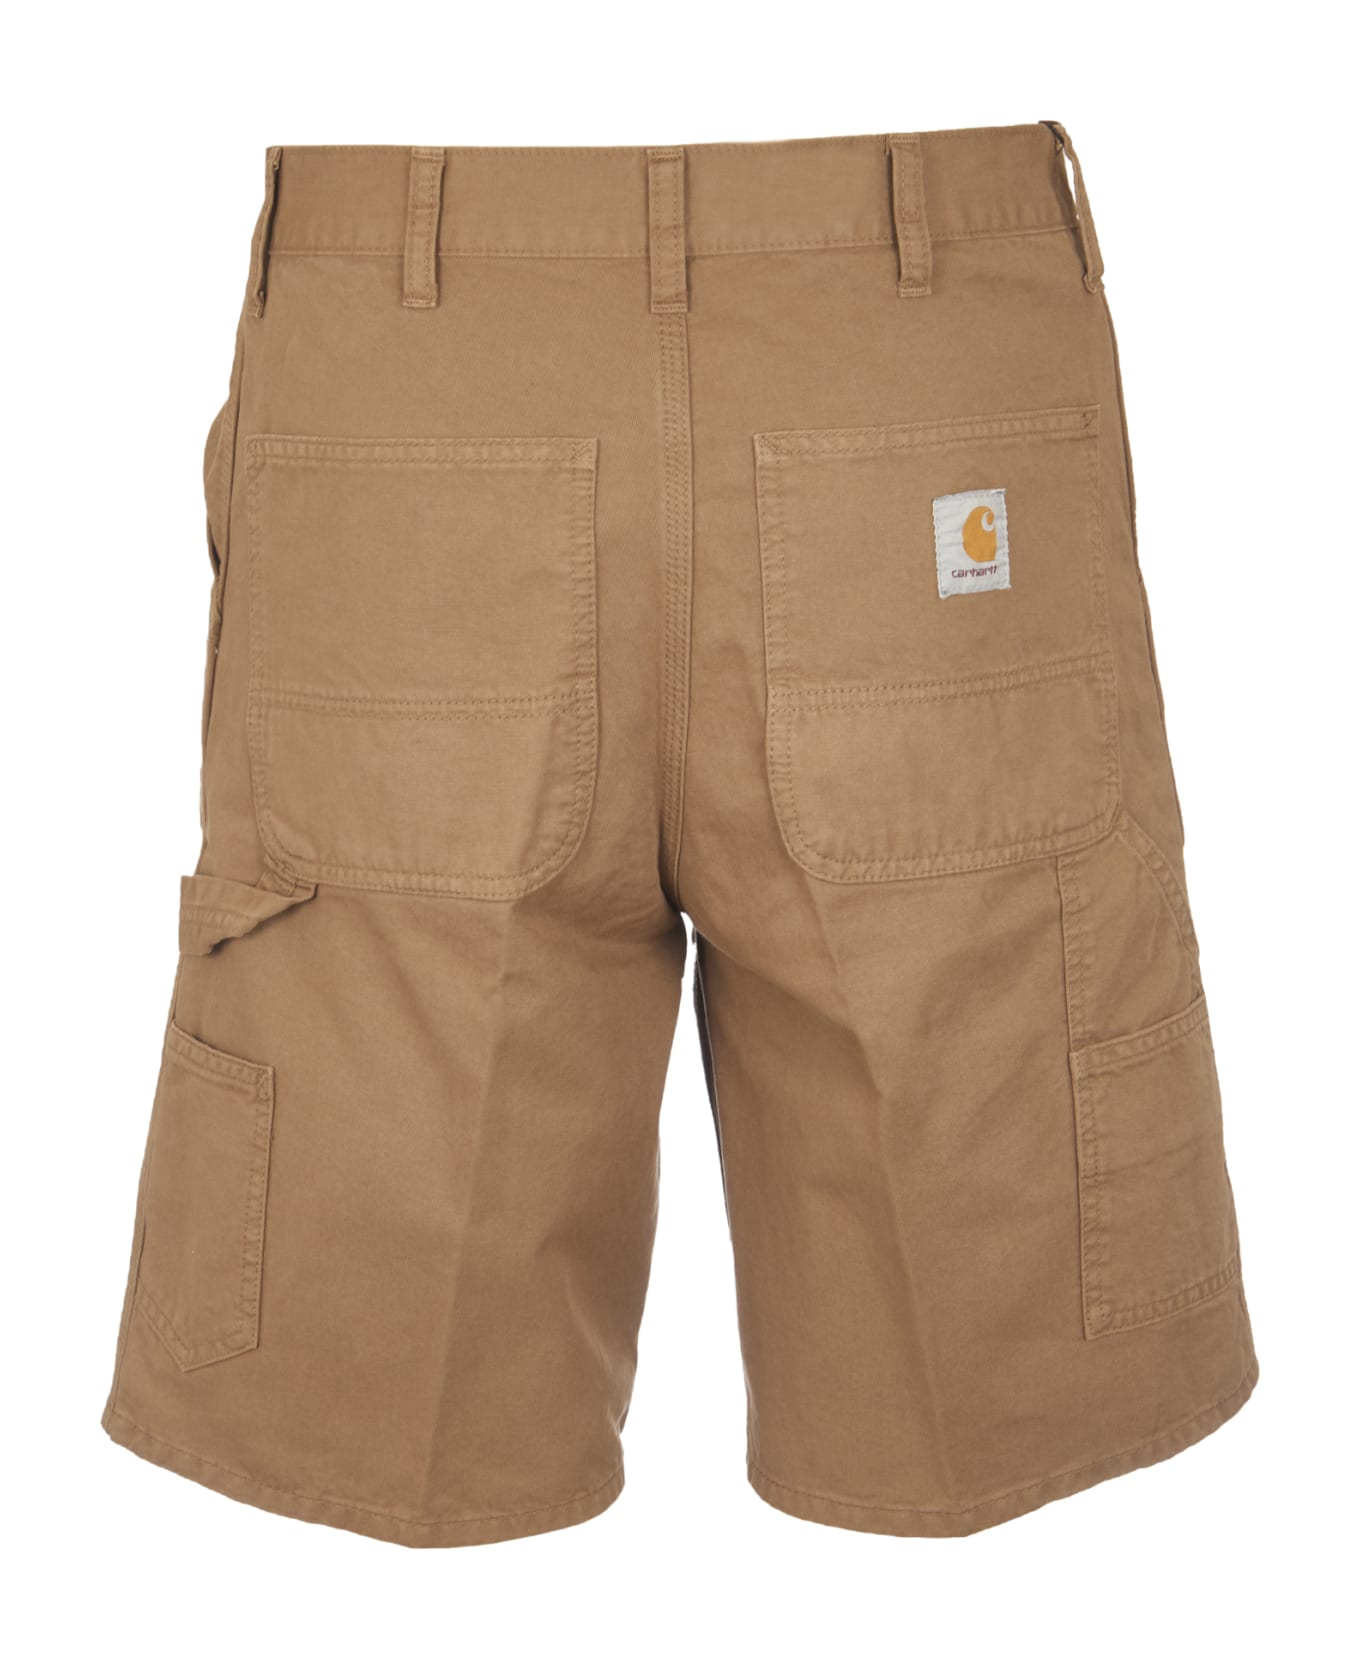 Carhartt Fitted Buttoned Shorts - Buffalo